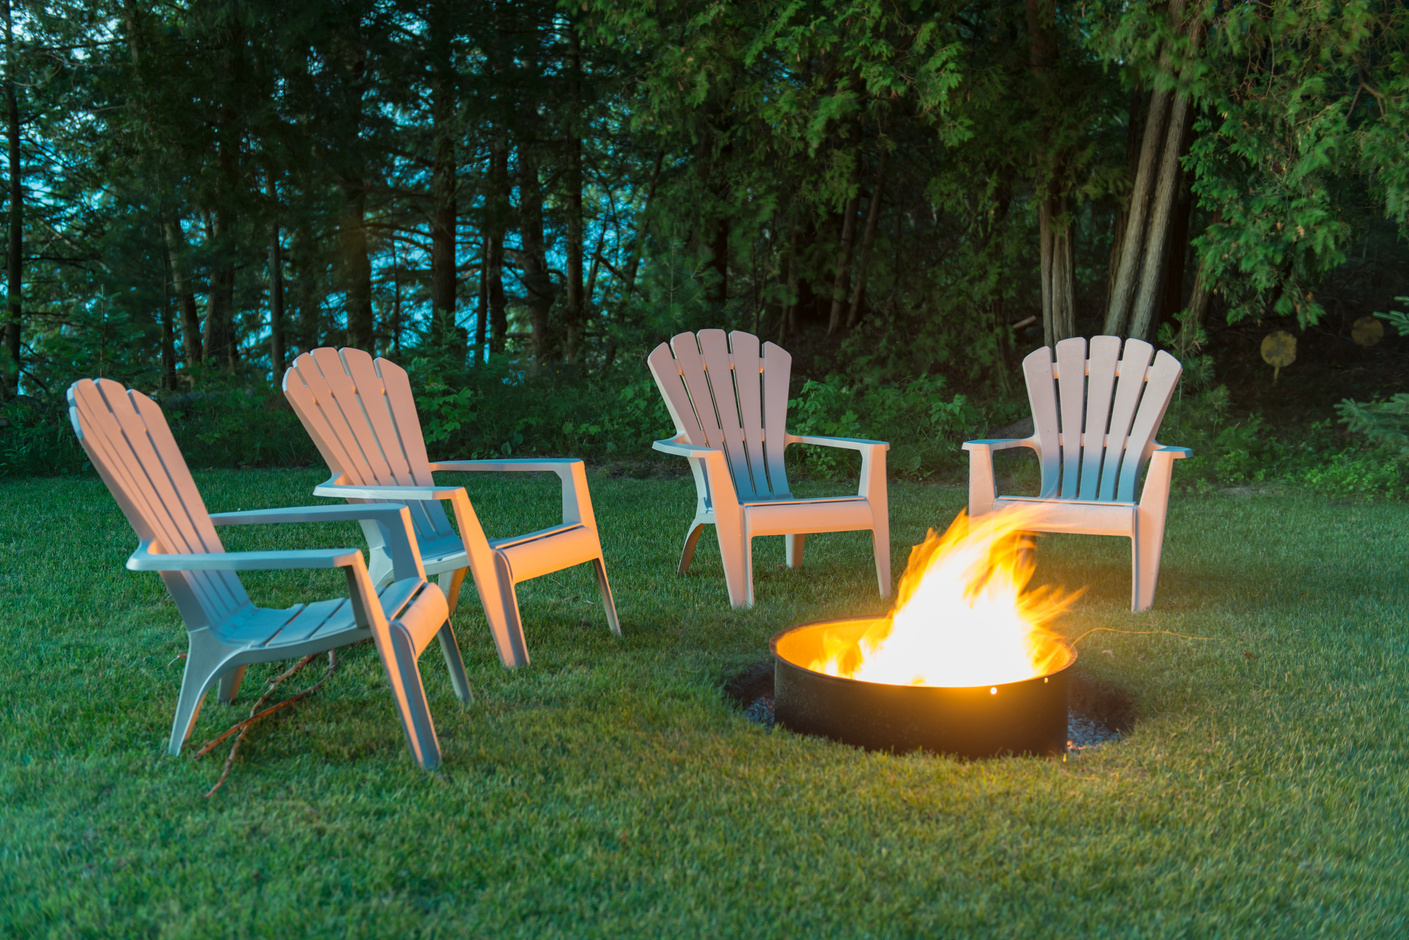 Chairs around a camp fire